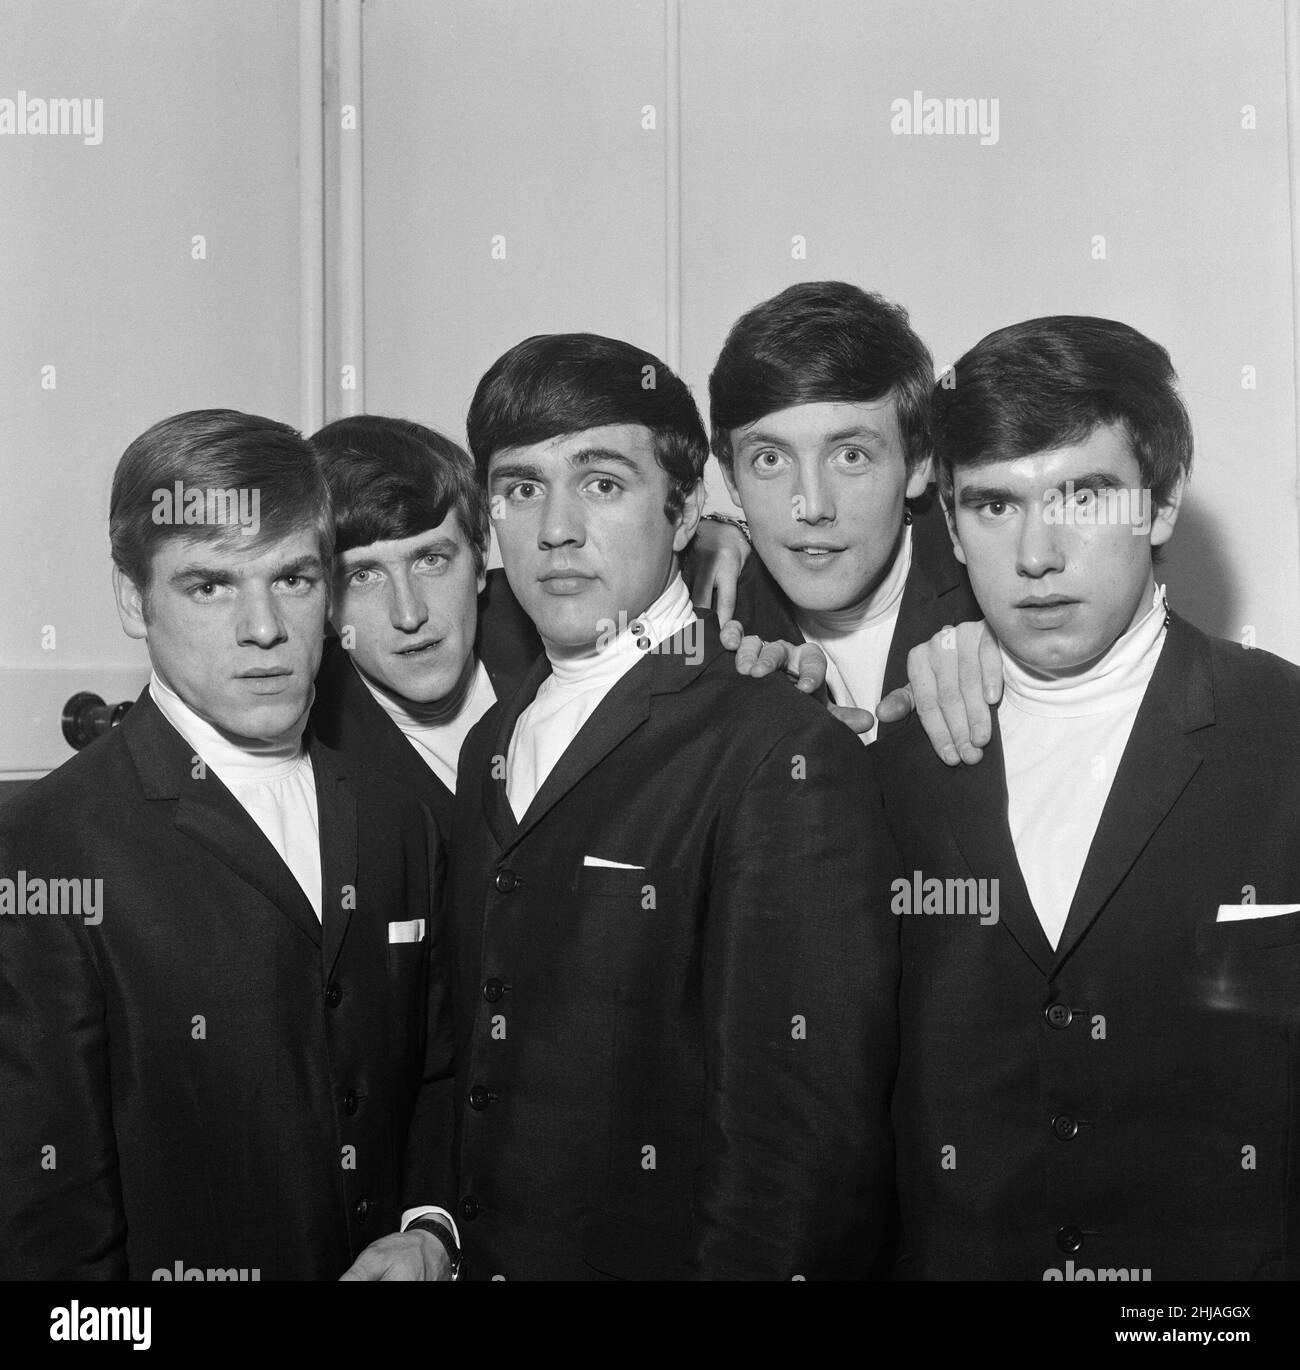 The Dave Clarke Five. Left to right: Lenny Davison (guitar) Rick Huxley (bass guitar) Dave Clark (drums) Mike Smith (lead vocals and keyboards organ) Denis Patton (saxophone)  When this picture was taken The Dave Clark Five were at the top of the charts with their hit 'Glad All Over'  Picture taken 8th January 1964 Stock Photo